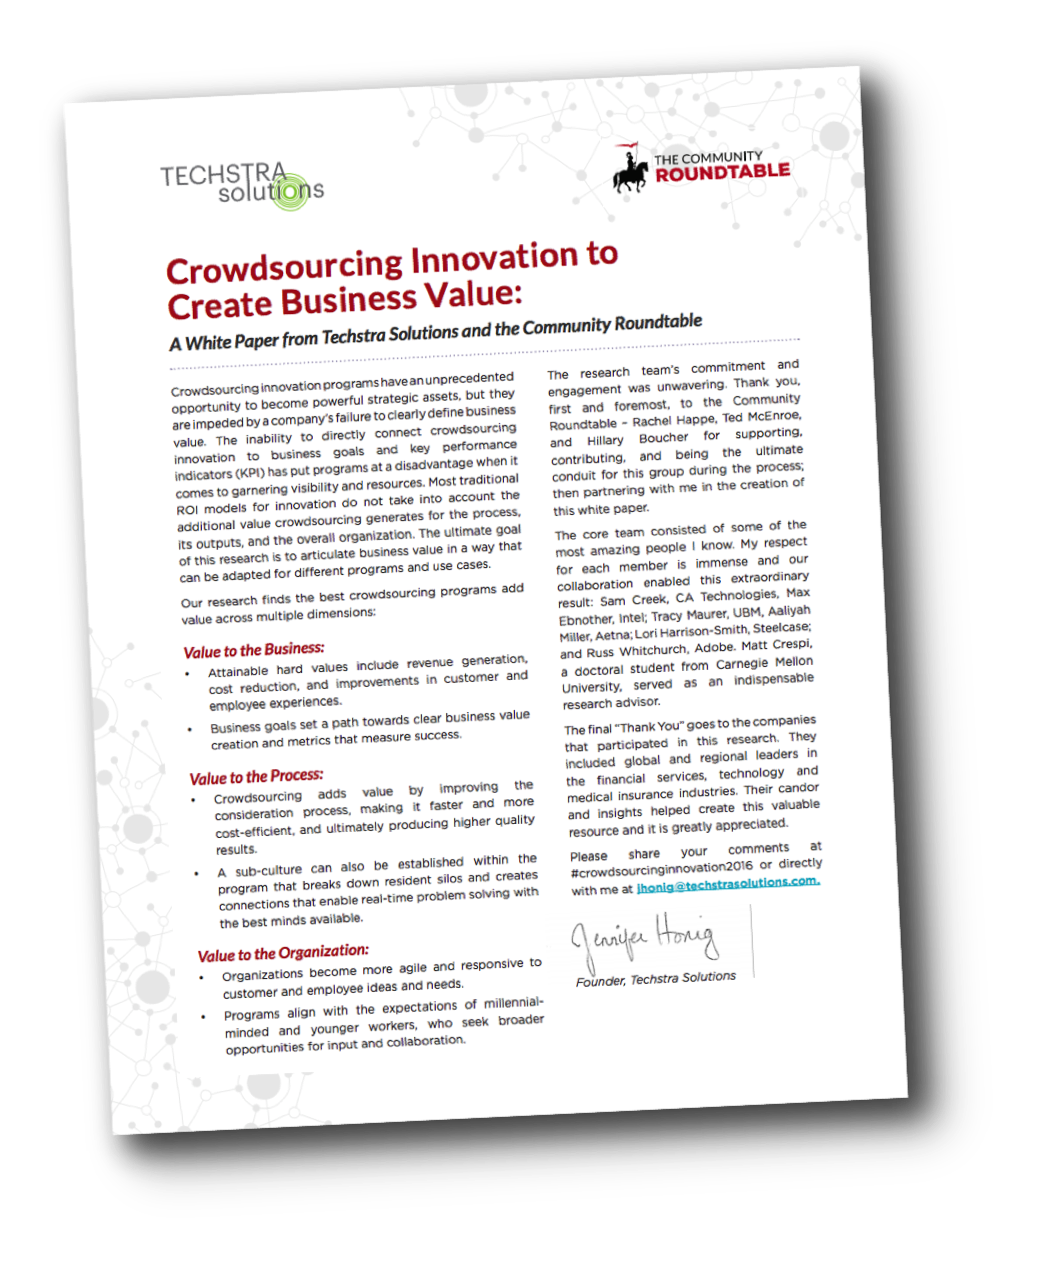 Crowdsourcing and business value